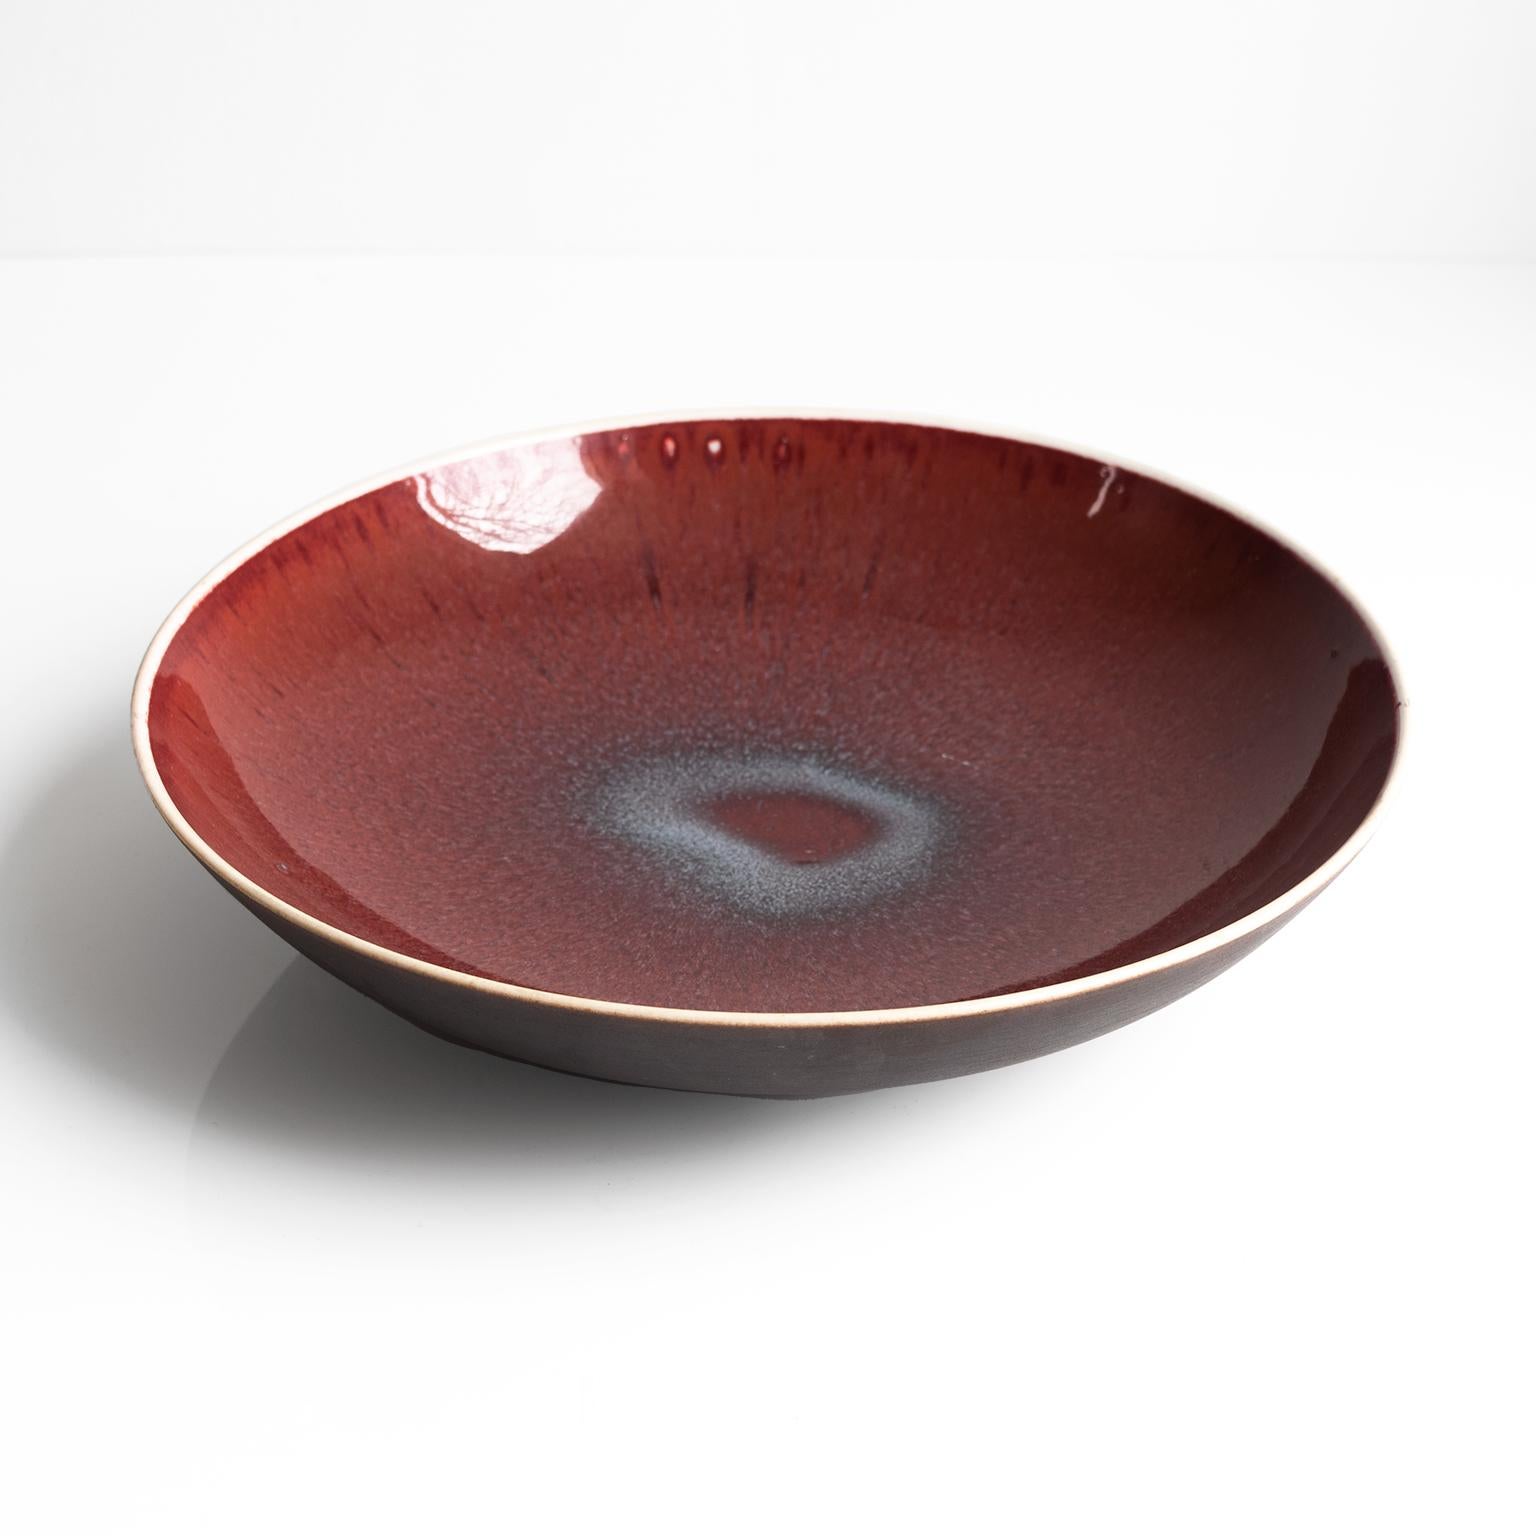 Scandinavian Modern ox-blood glaze hand thrown footed bowl by Friedl Kjellberg for Arabia, Finland. 1950's Signed on bottom

She is known to have been inspired and influenced throughout her life by the methods and shapes of Chinese ceramics.